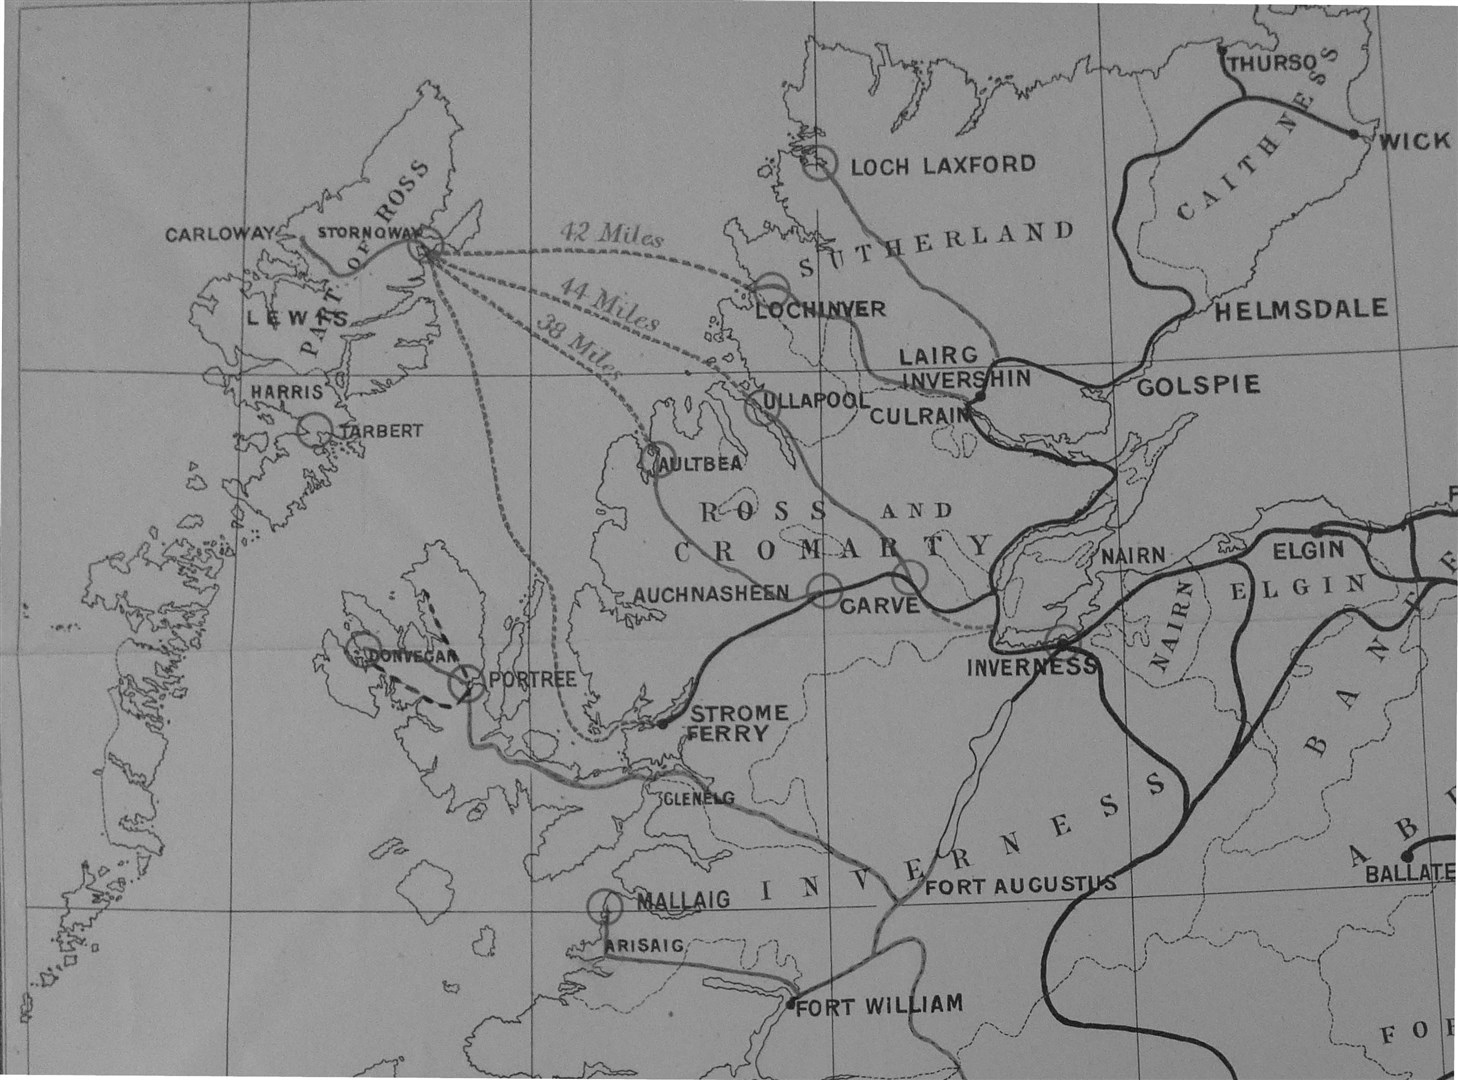 Map prepared by William Dunvar of the Scottish Office in 1892 showing most of the proposed railways.